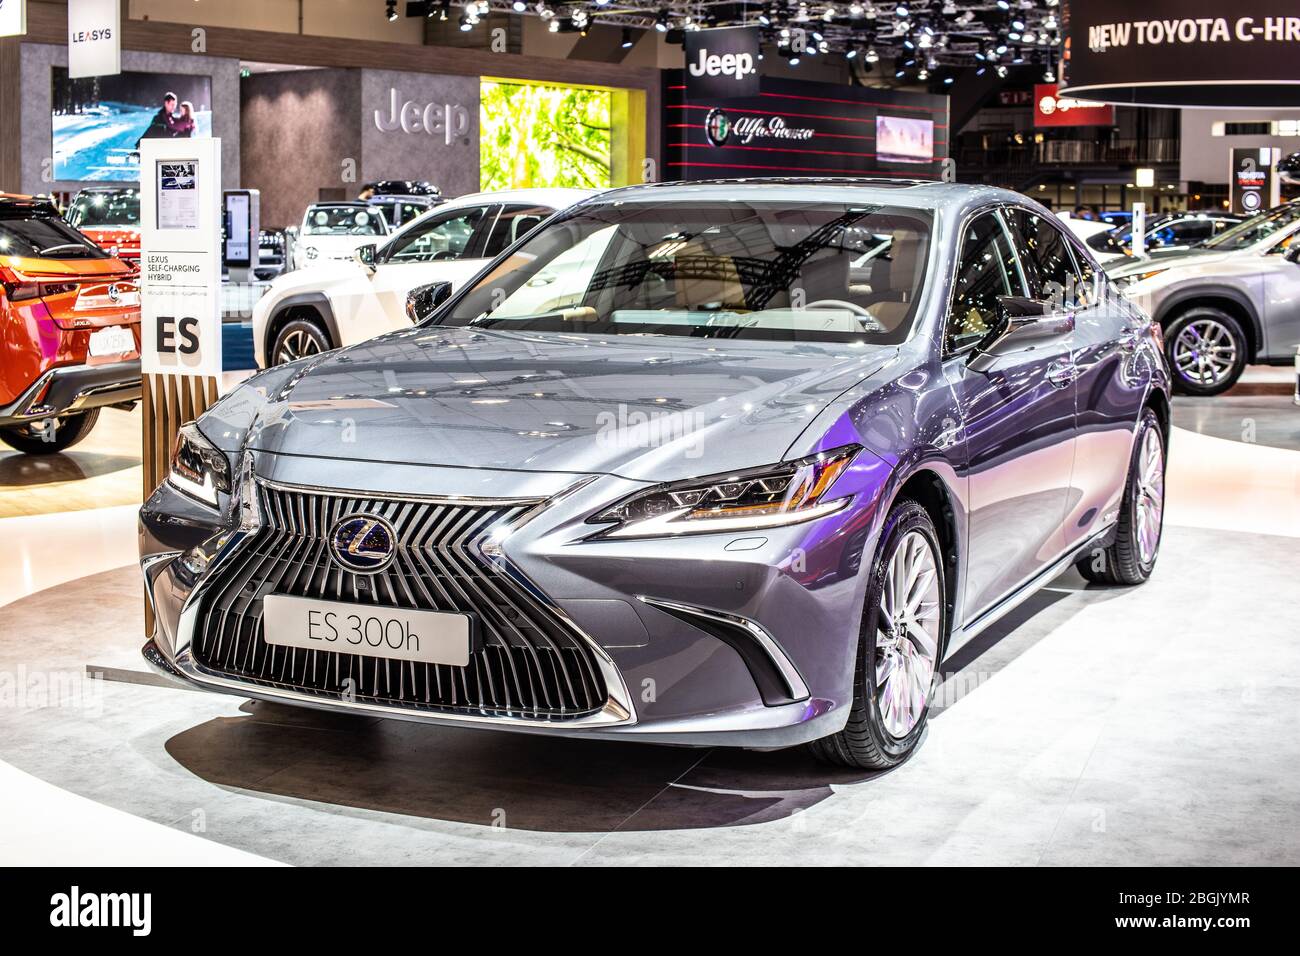 Lexus Es300h High Resolution Stock Photography and Images - Alamy